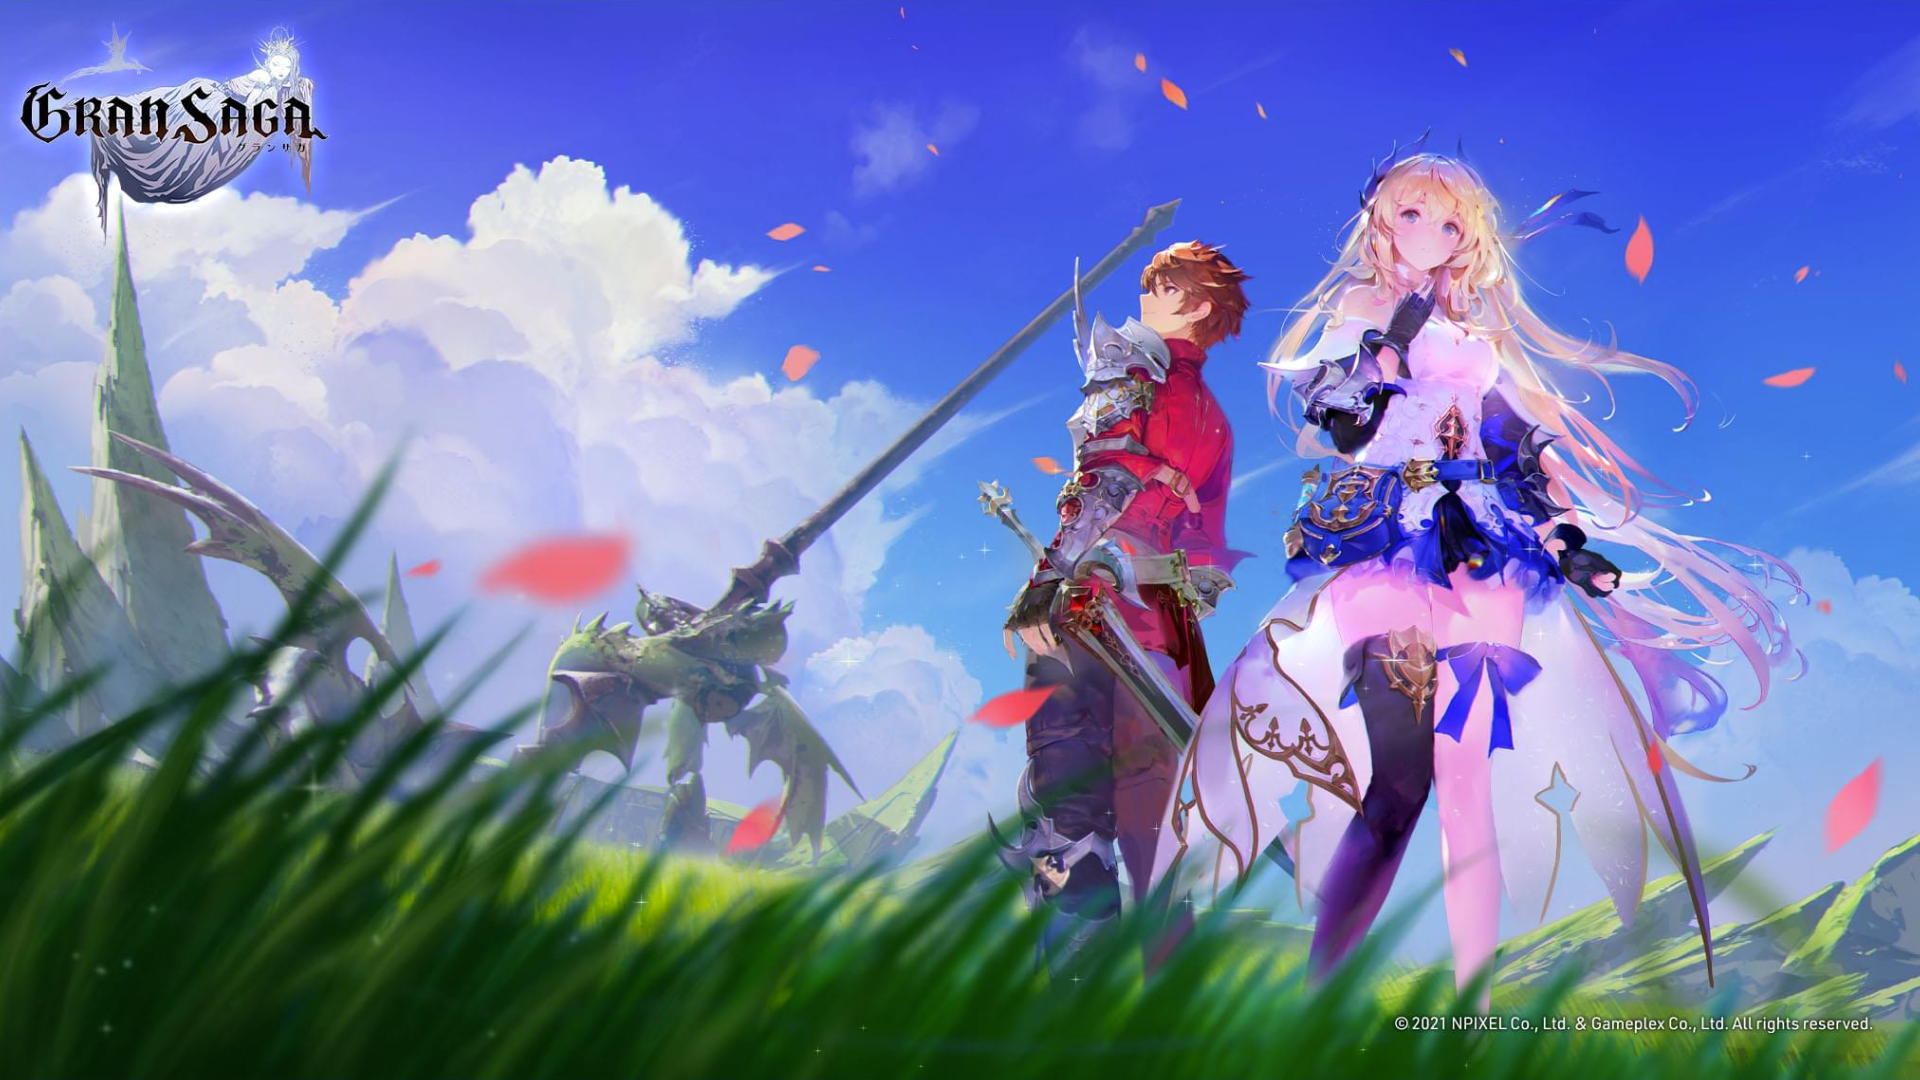 Action-packed anime MMORPG with stunning visuals! Pre-register now for Gran Saga Global version!